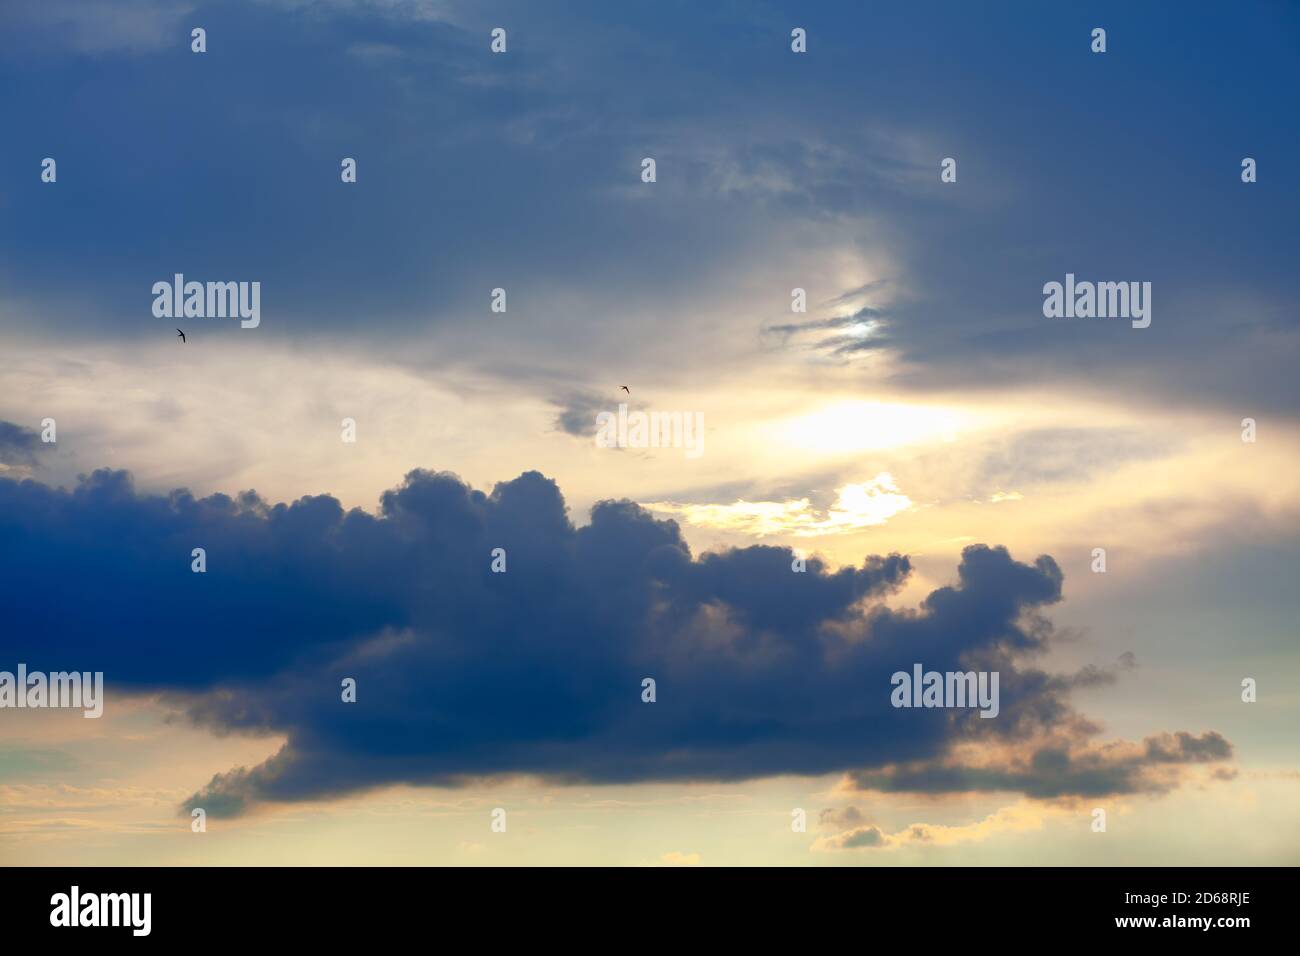 fantastic heaven with dark clouds at dusk Stock Photo